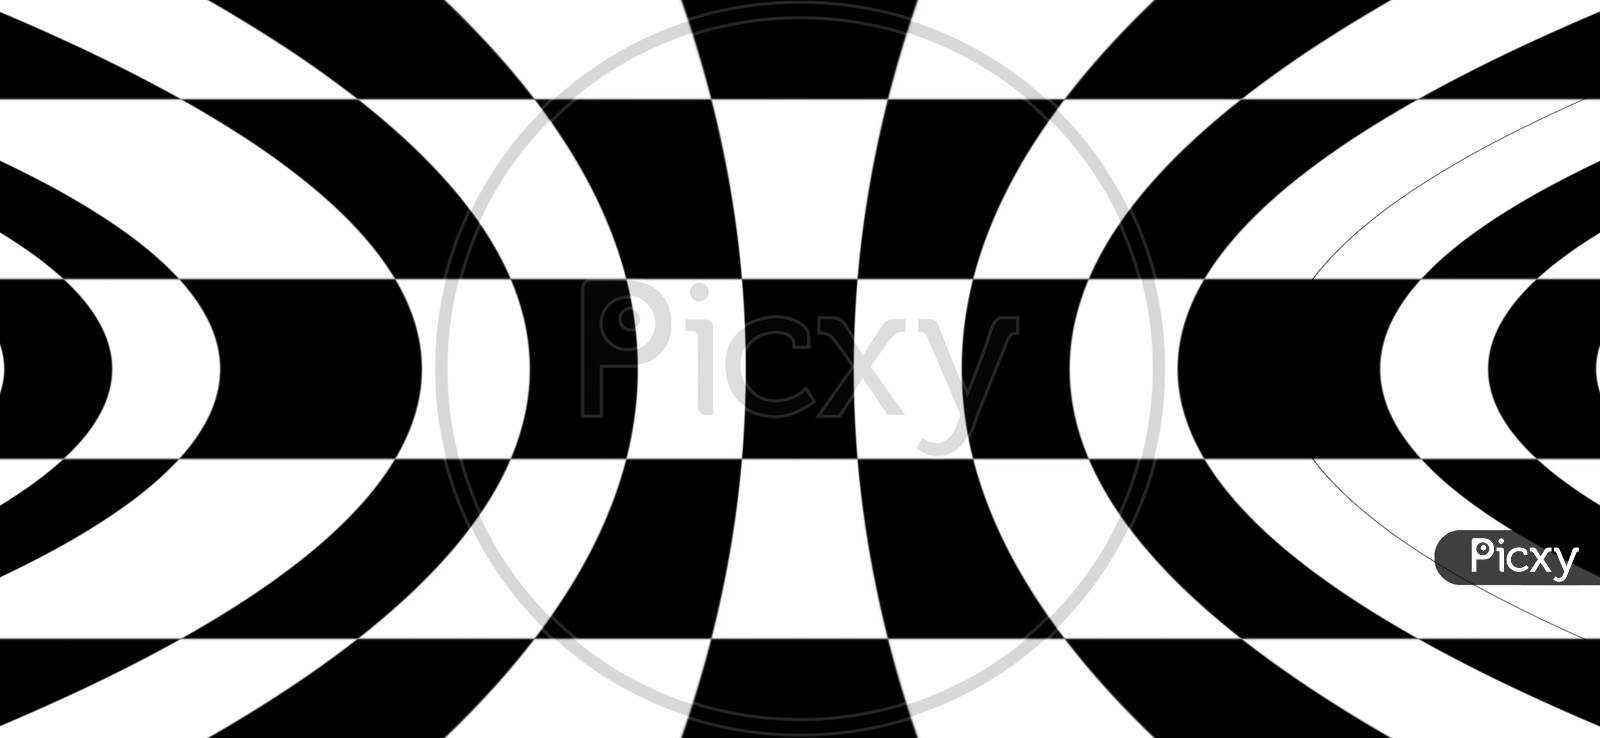 Abstract Lines Seamless Geometric Patterns Background - Geometric Pattern Circle - Abstract Geometric Pattern Squares With Seamless Patterns Background. Black And White Texture. Graphic Modern Pattern